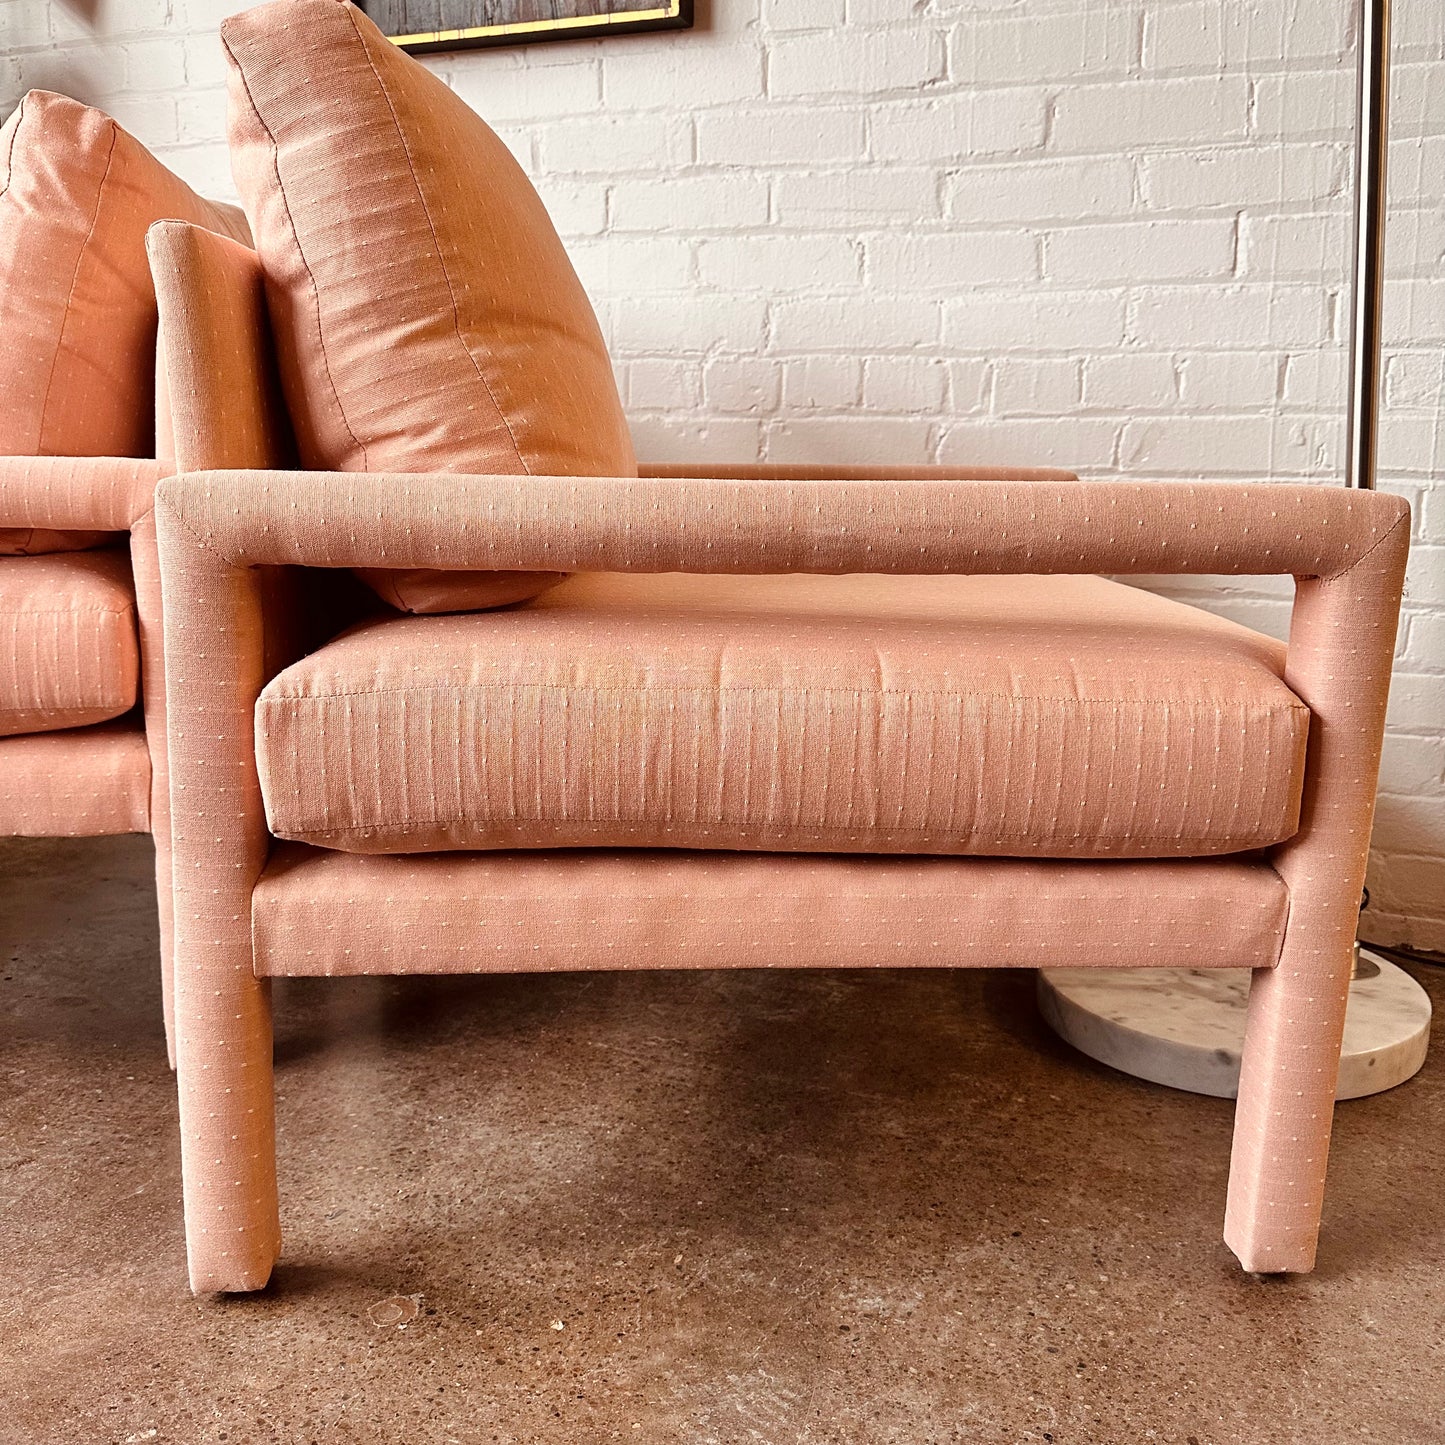 PINK UPHOLSTERED LANE PARSONS CHAIRS - A PAIR